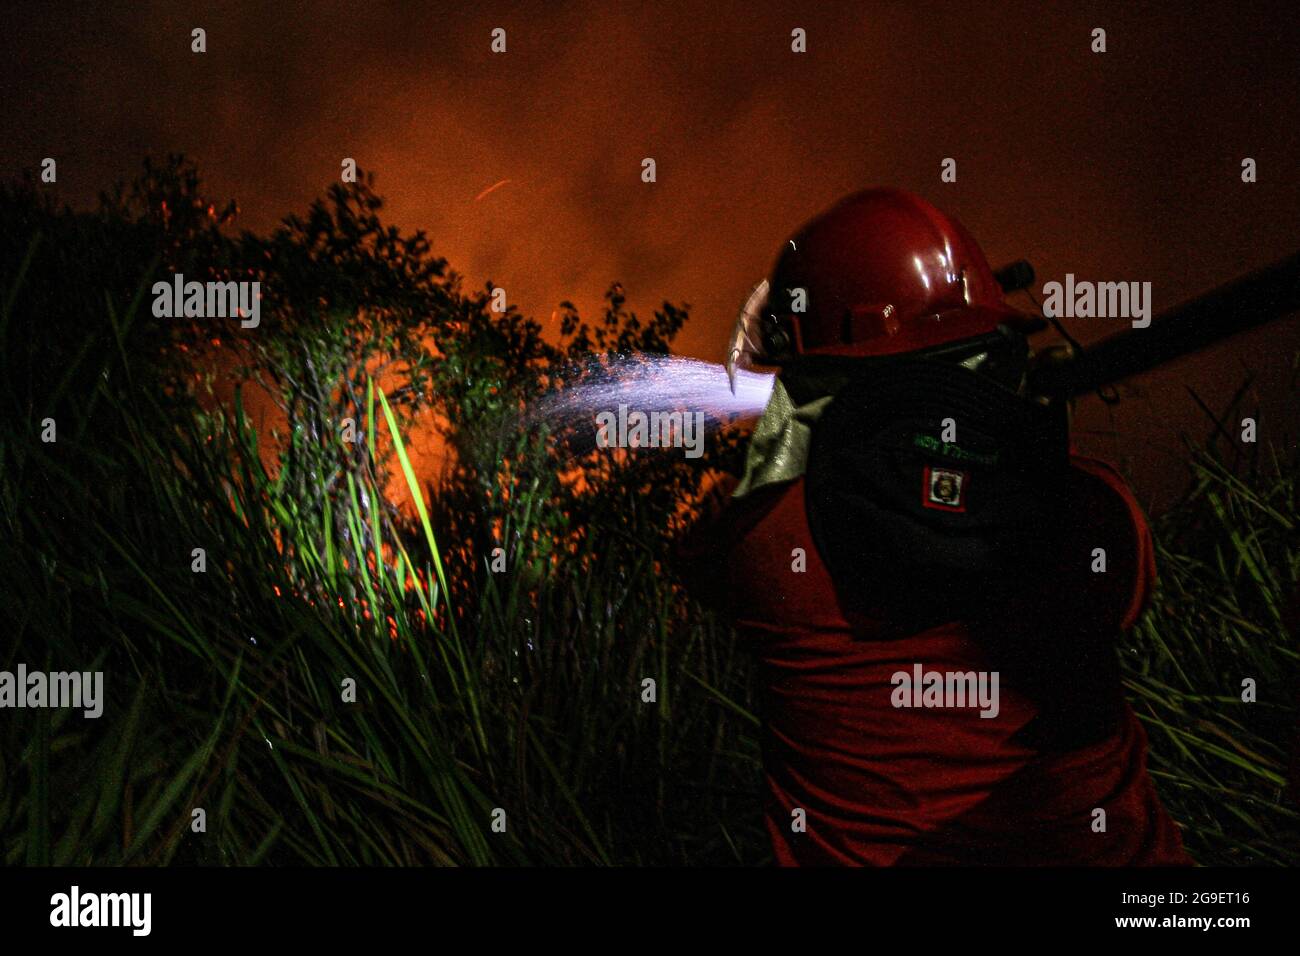 https://c8.alamy.com/comp/2G9ET16/officers-from-manggala-agni-daops-banyuasin-extinguish-peatland-fires-in-ibul-1-village-pemulutan-district-ogan-ilir-regency-south-sumatra-this-land-fire-occurred-at-1000-wib-with-an-area-of-about-4-hectares-of-peat-burned-photo-by-humaidy-kenedypacific-presssipa-usa-2G9ET16.jpg